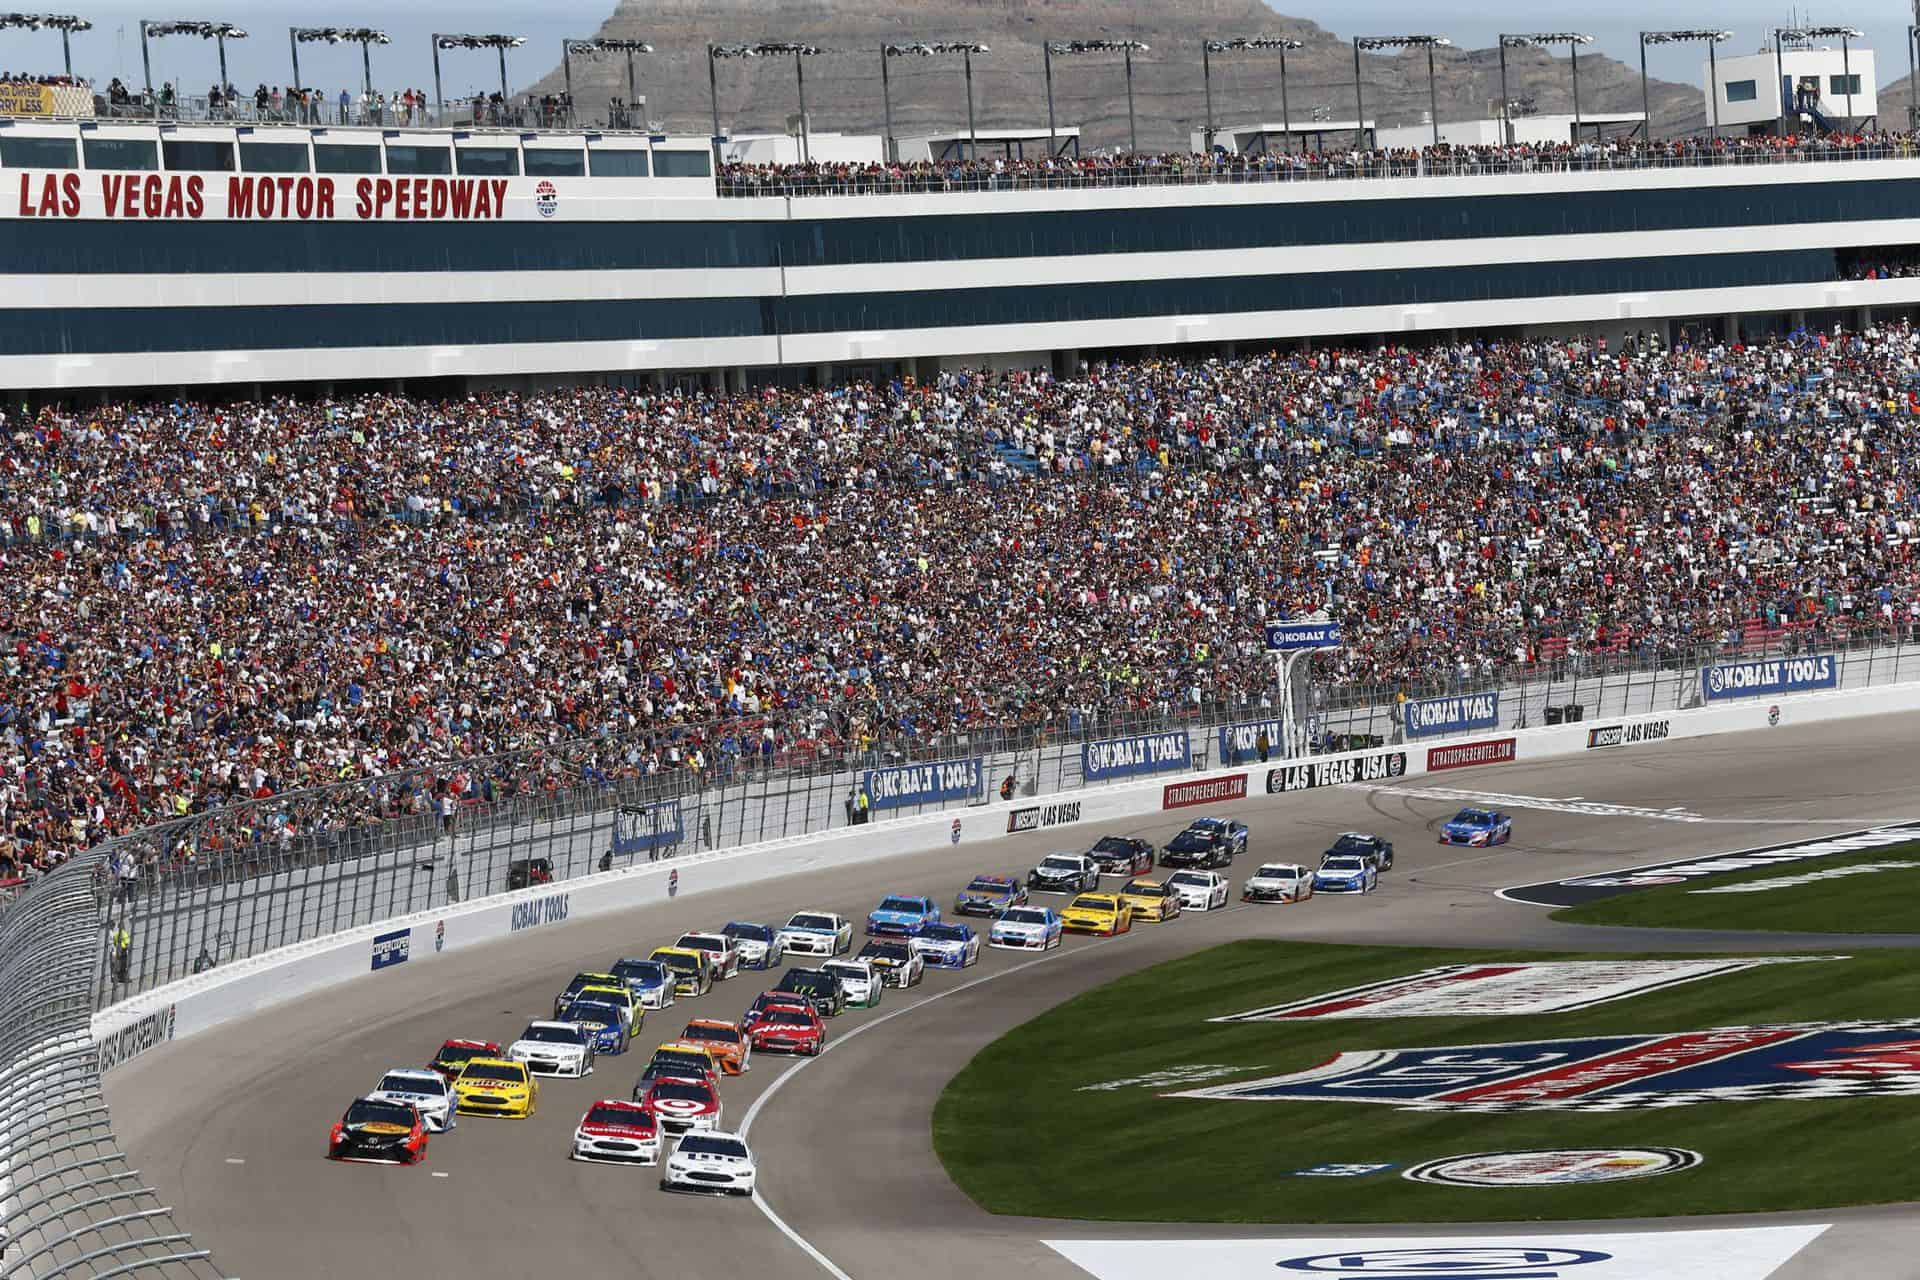 Las Vegas Motor Speedway - Events, Tickets, Length, Size & Track Map